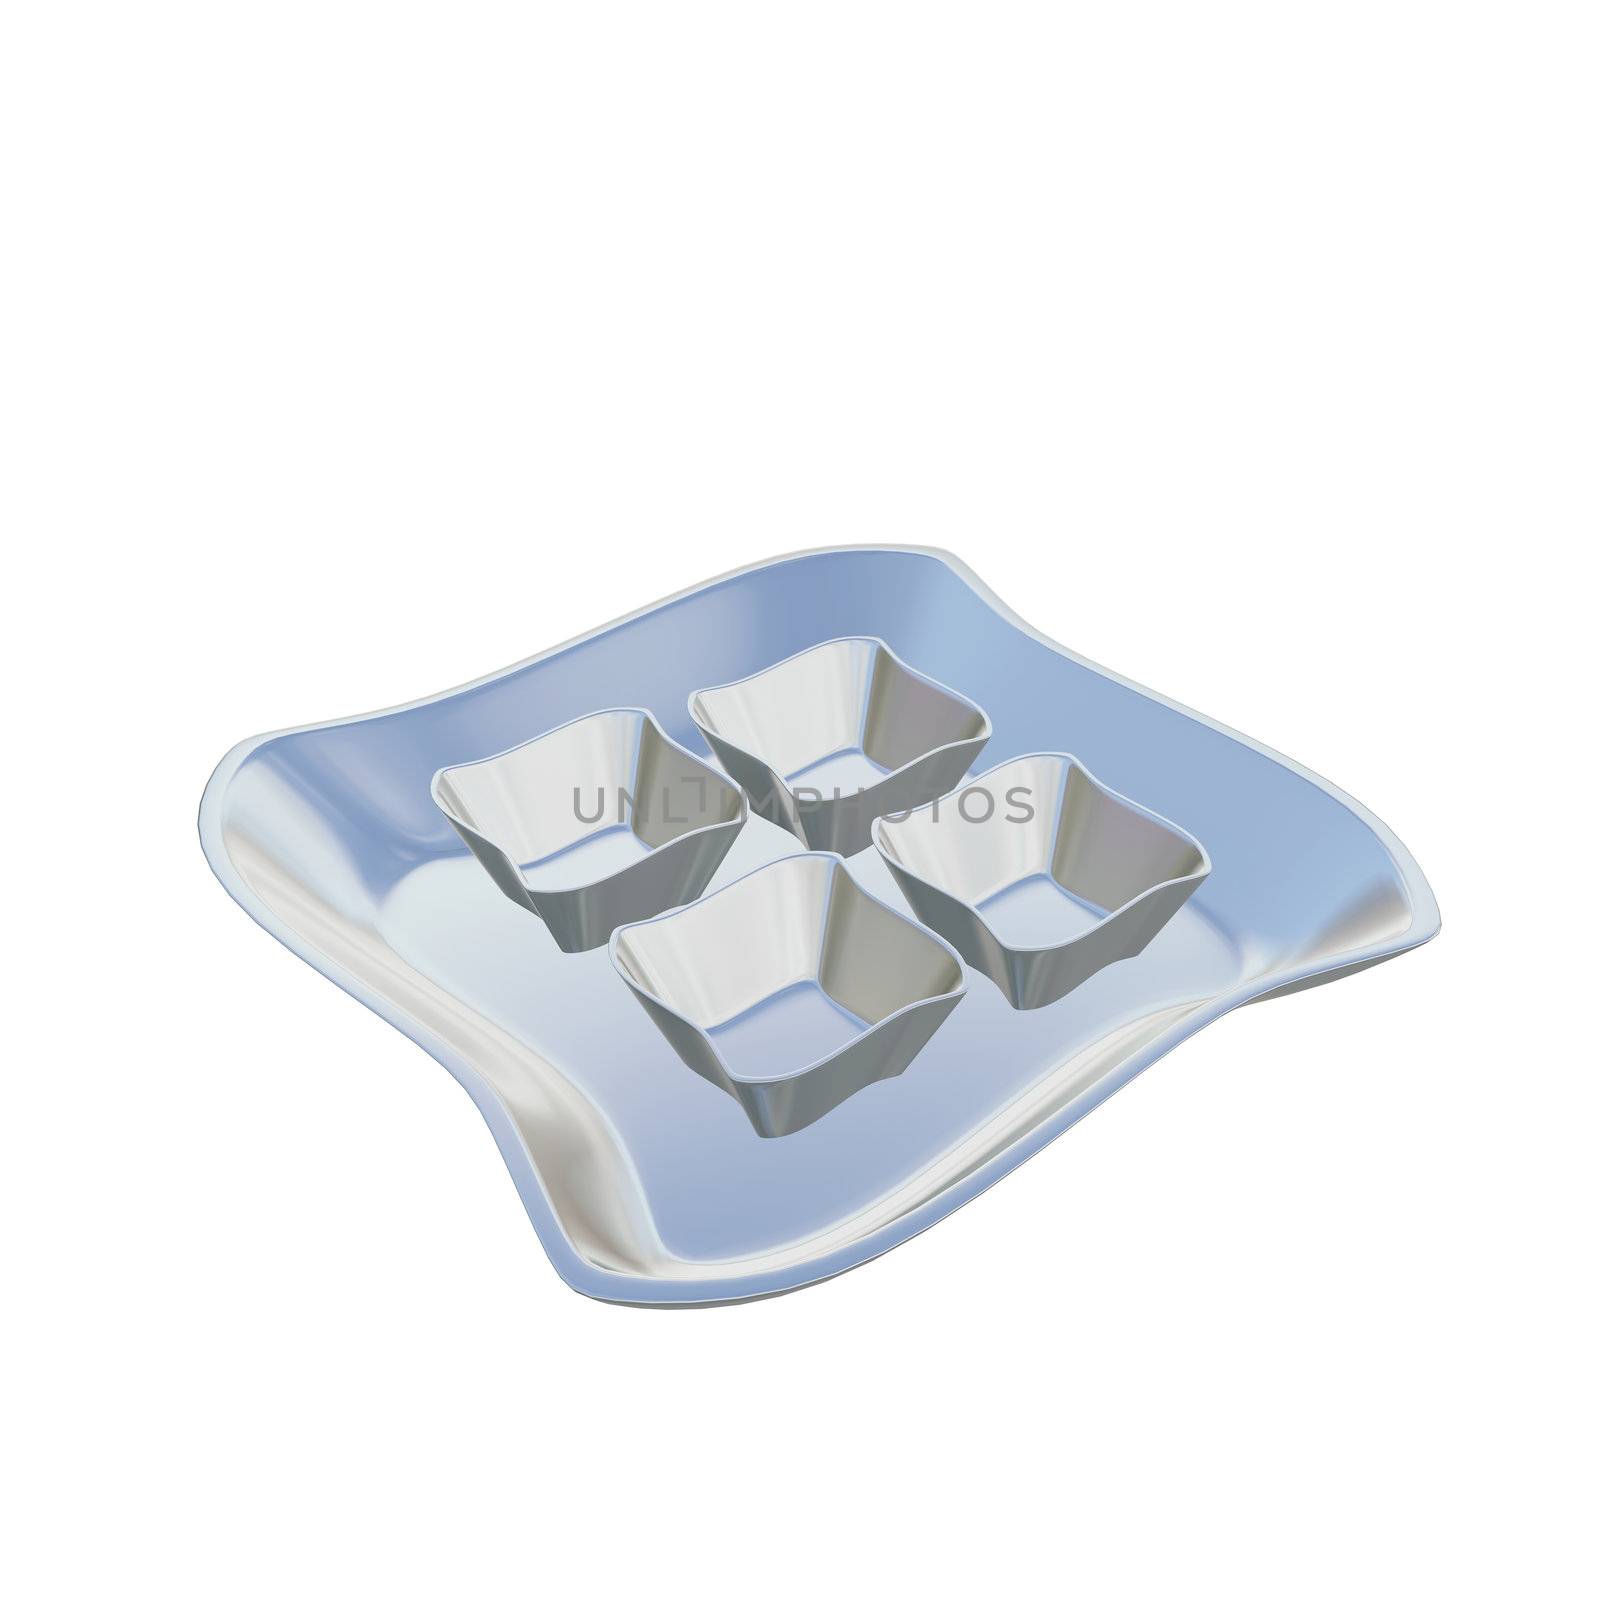 Fancy square shaped stainless steel serving dishes, 3D illustration, isolated against a white background